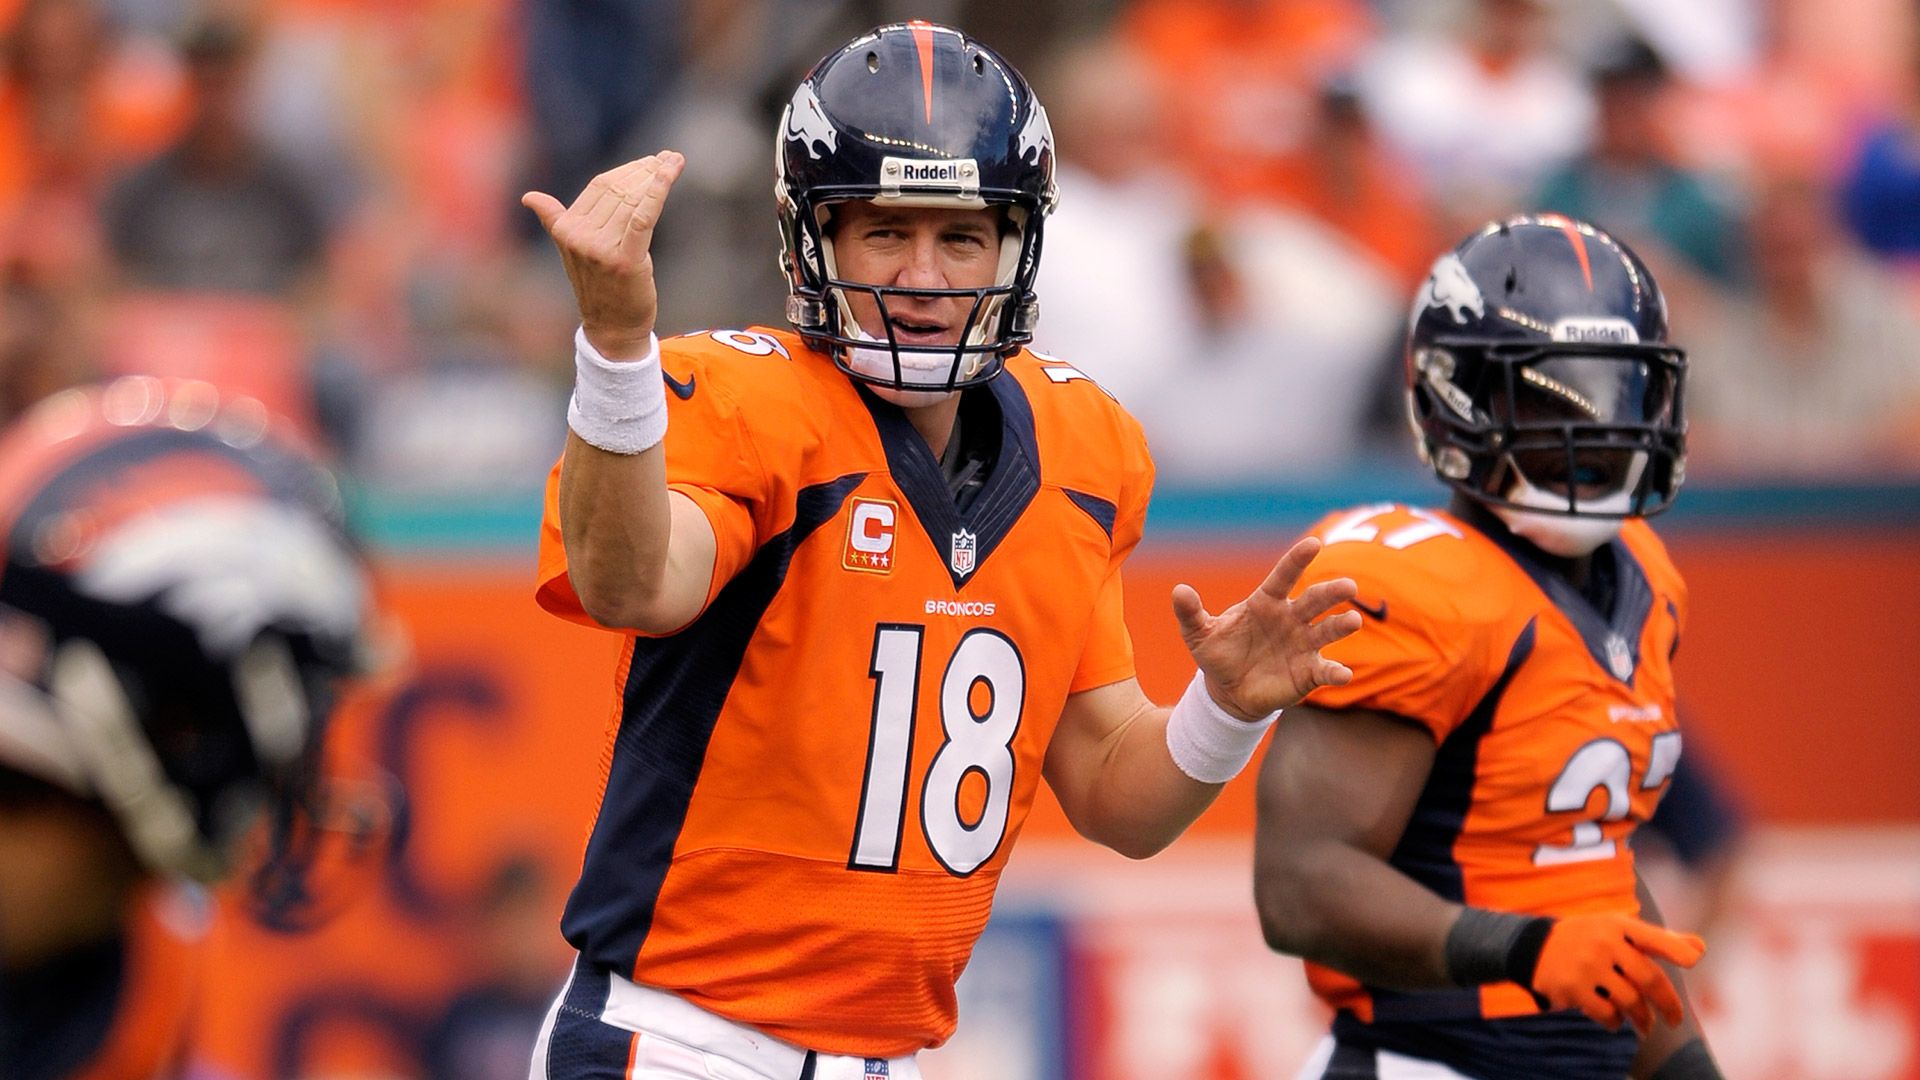 Peyton Manning takes over in 3rd quarter for Brock Osweiler as Denver Broncos' QB1920 x 1080